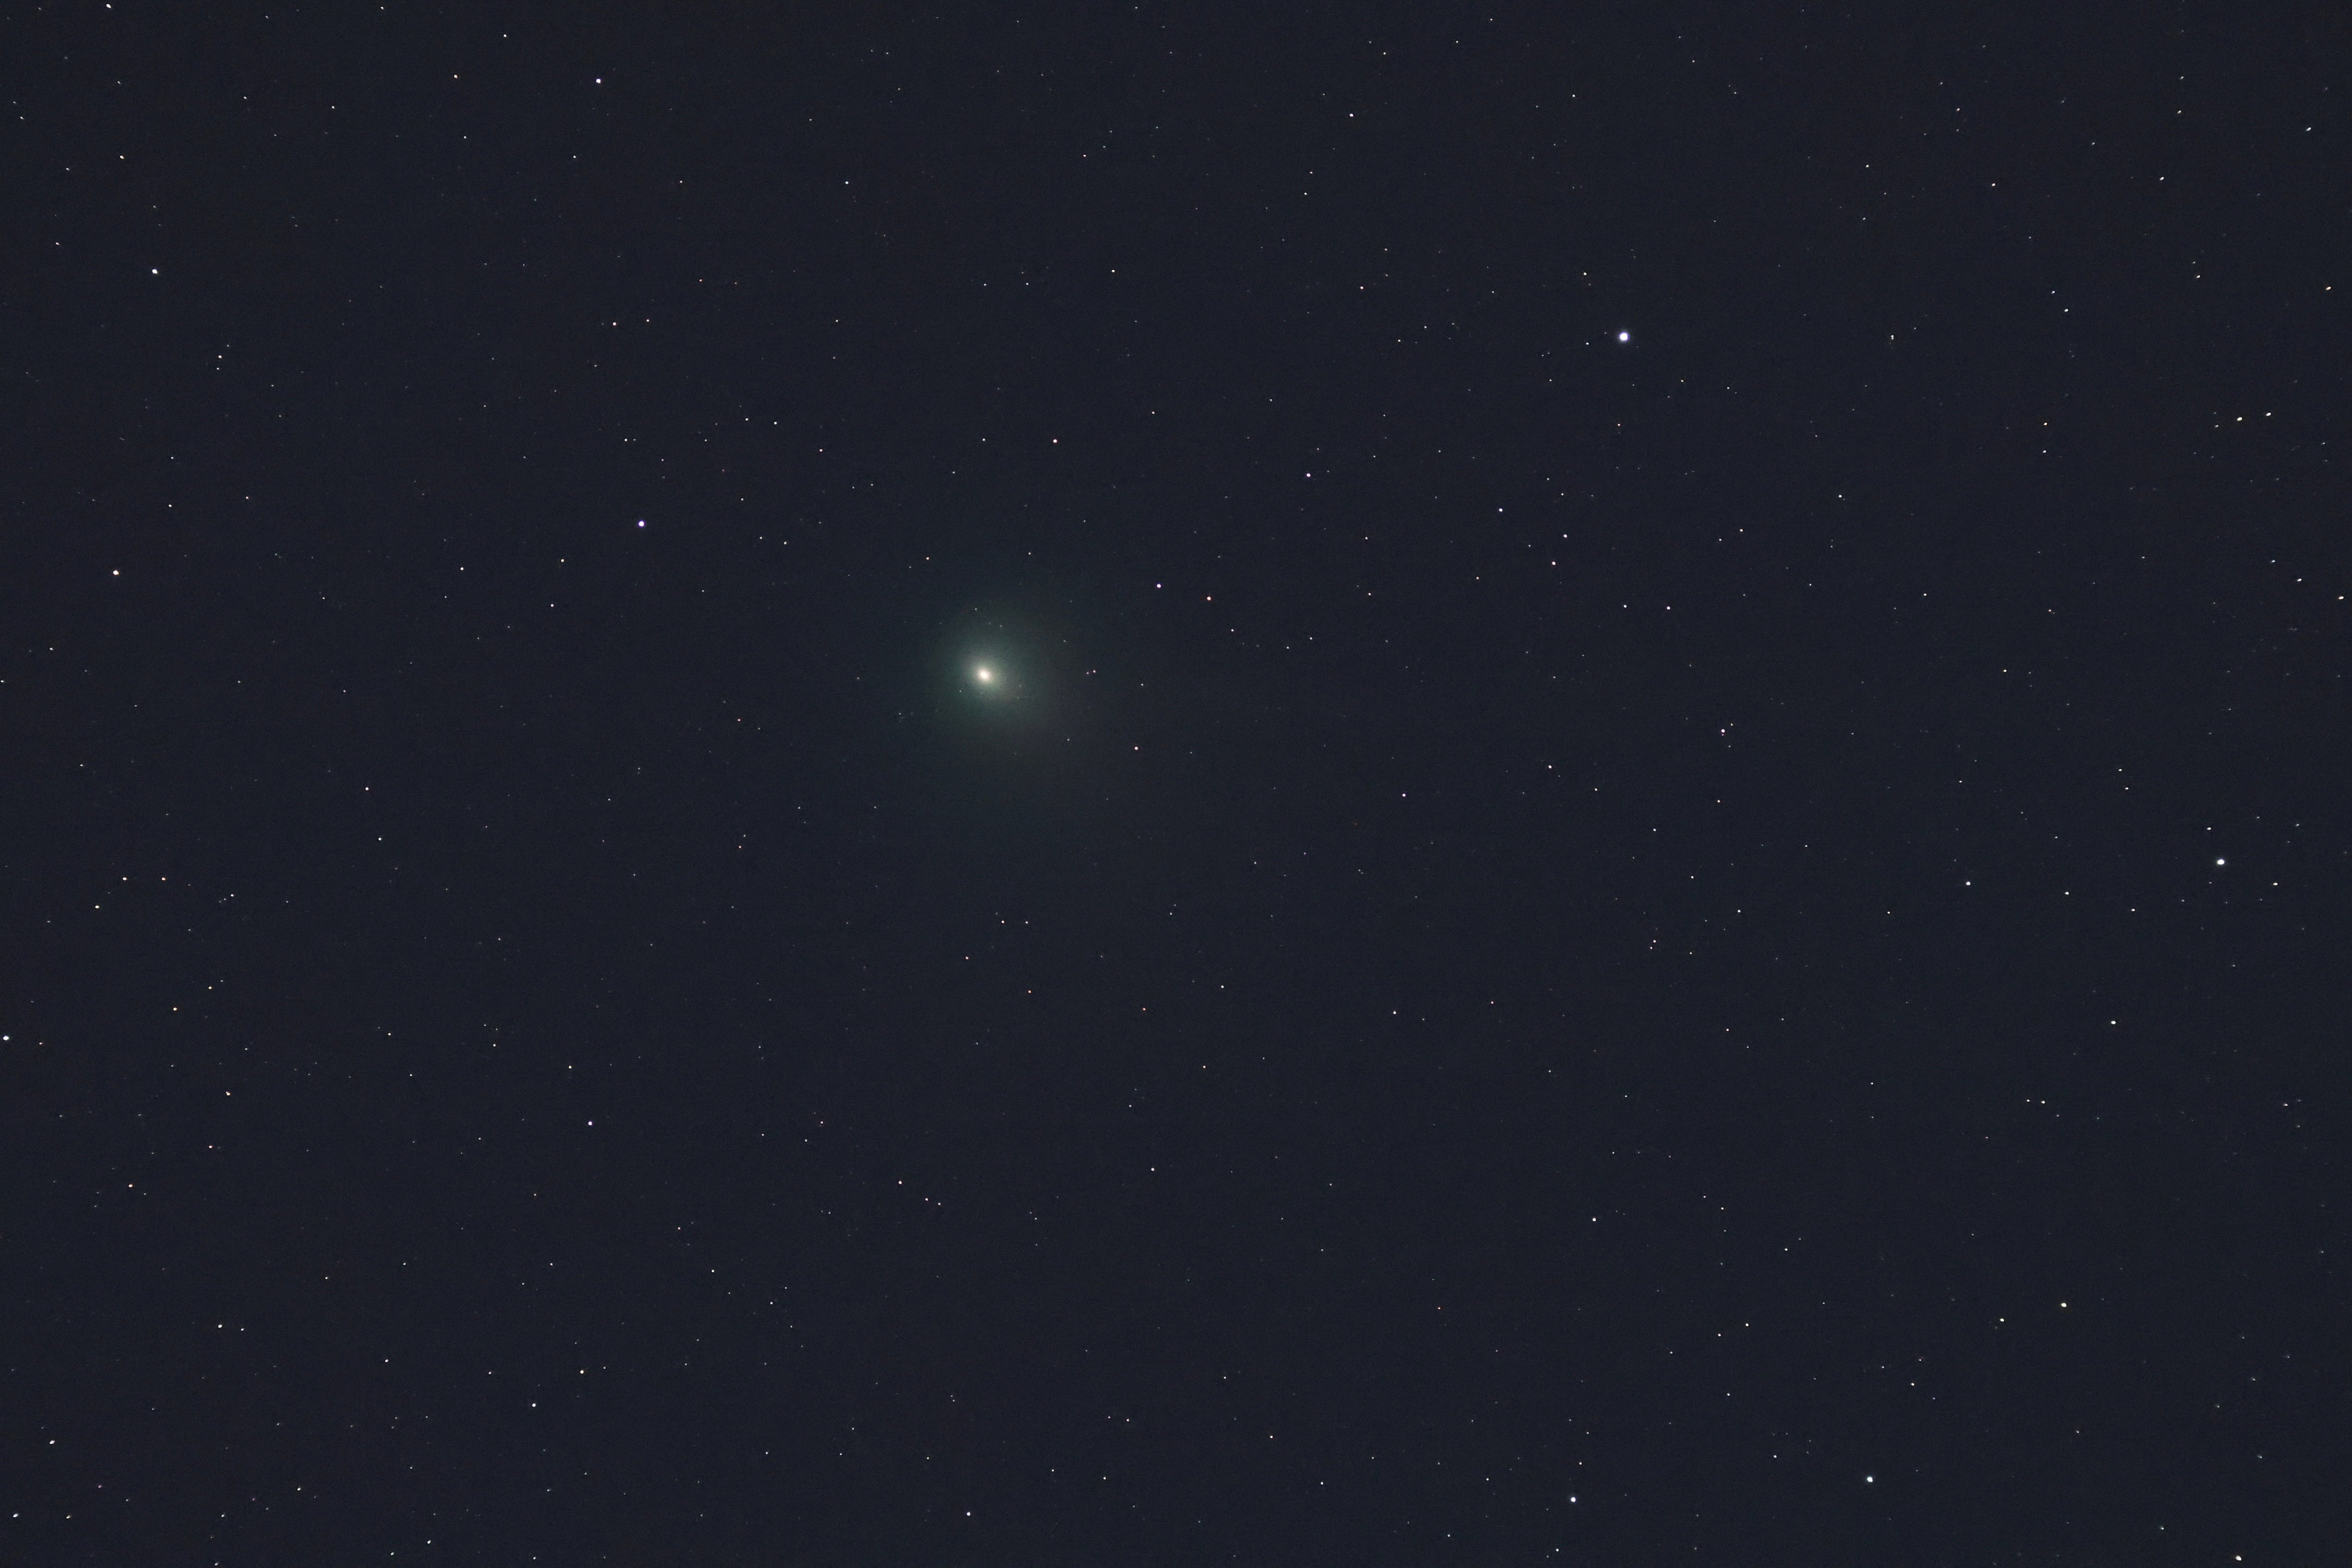 A view of a green comet named Comet C/2022 E3 (ZTF), over Kryoneri, Greece, February 1, 2023.